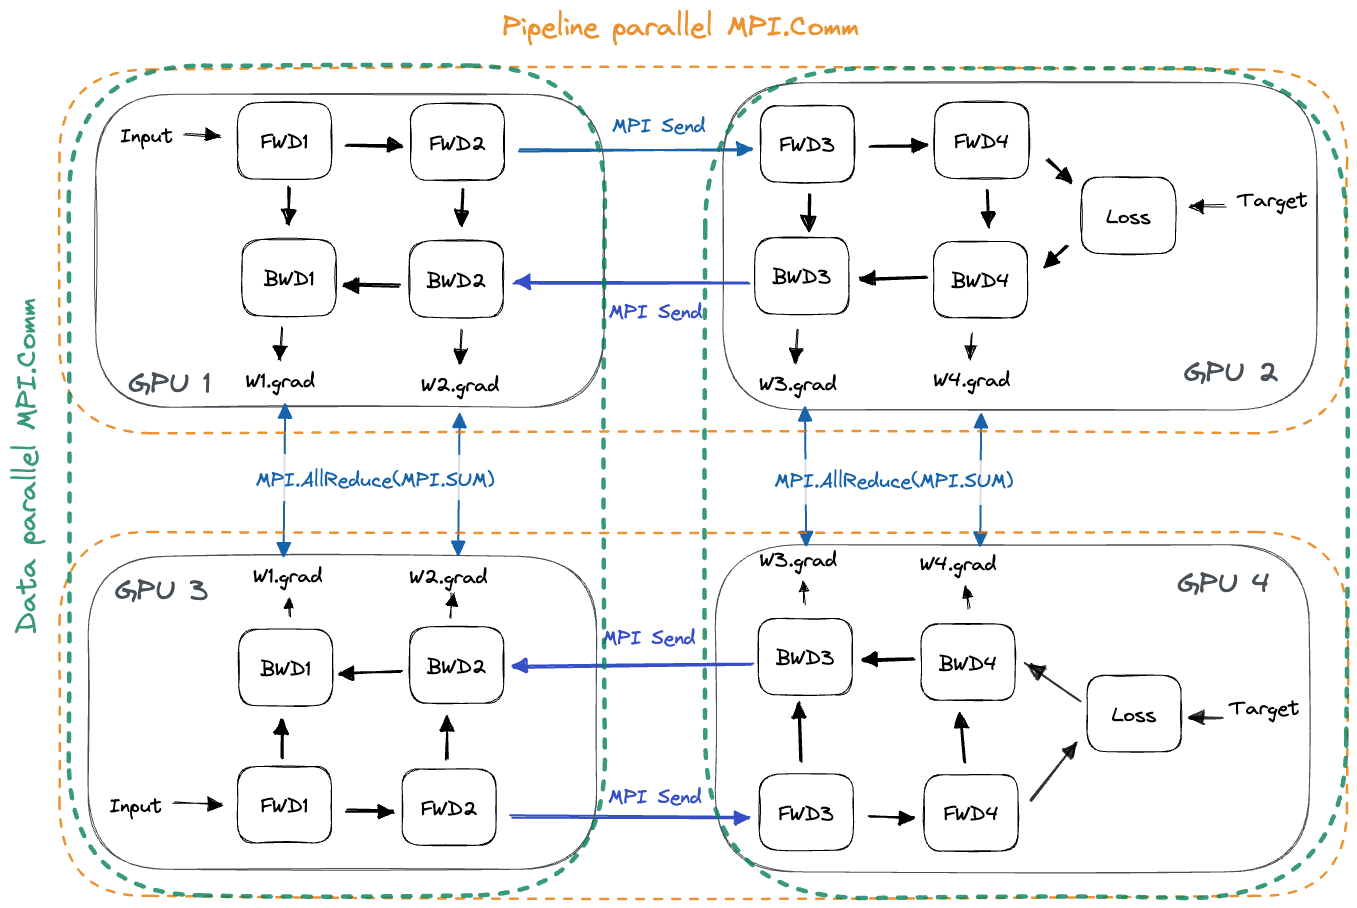 Data parallelism and Pipeline parallelism